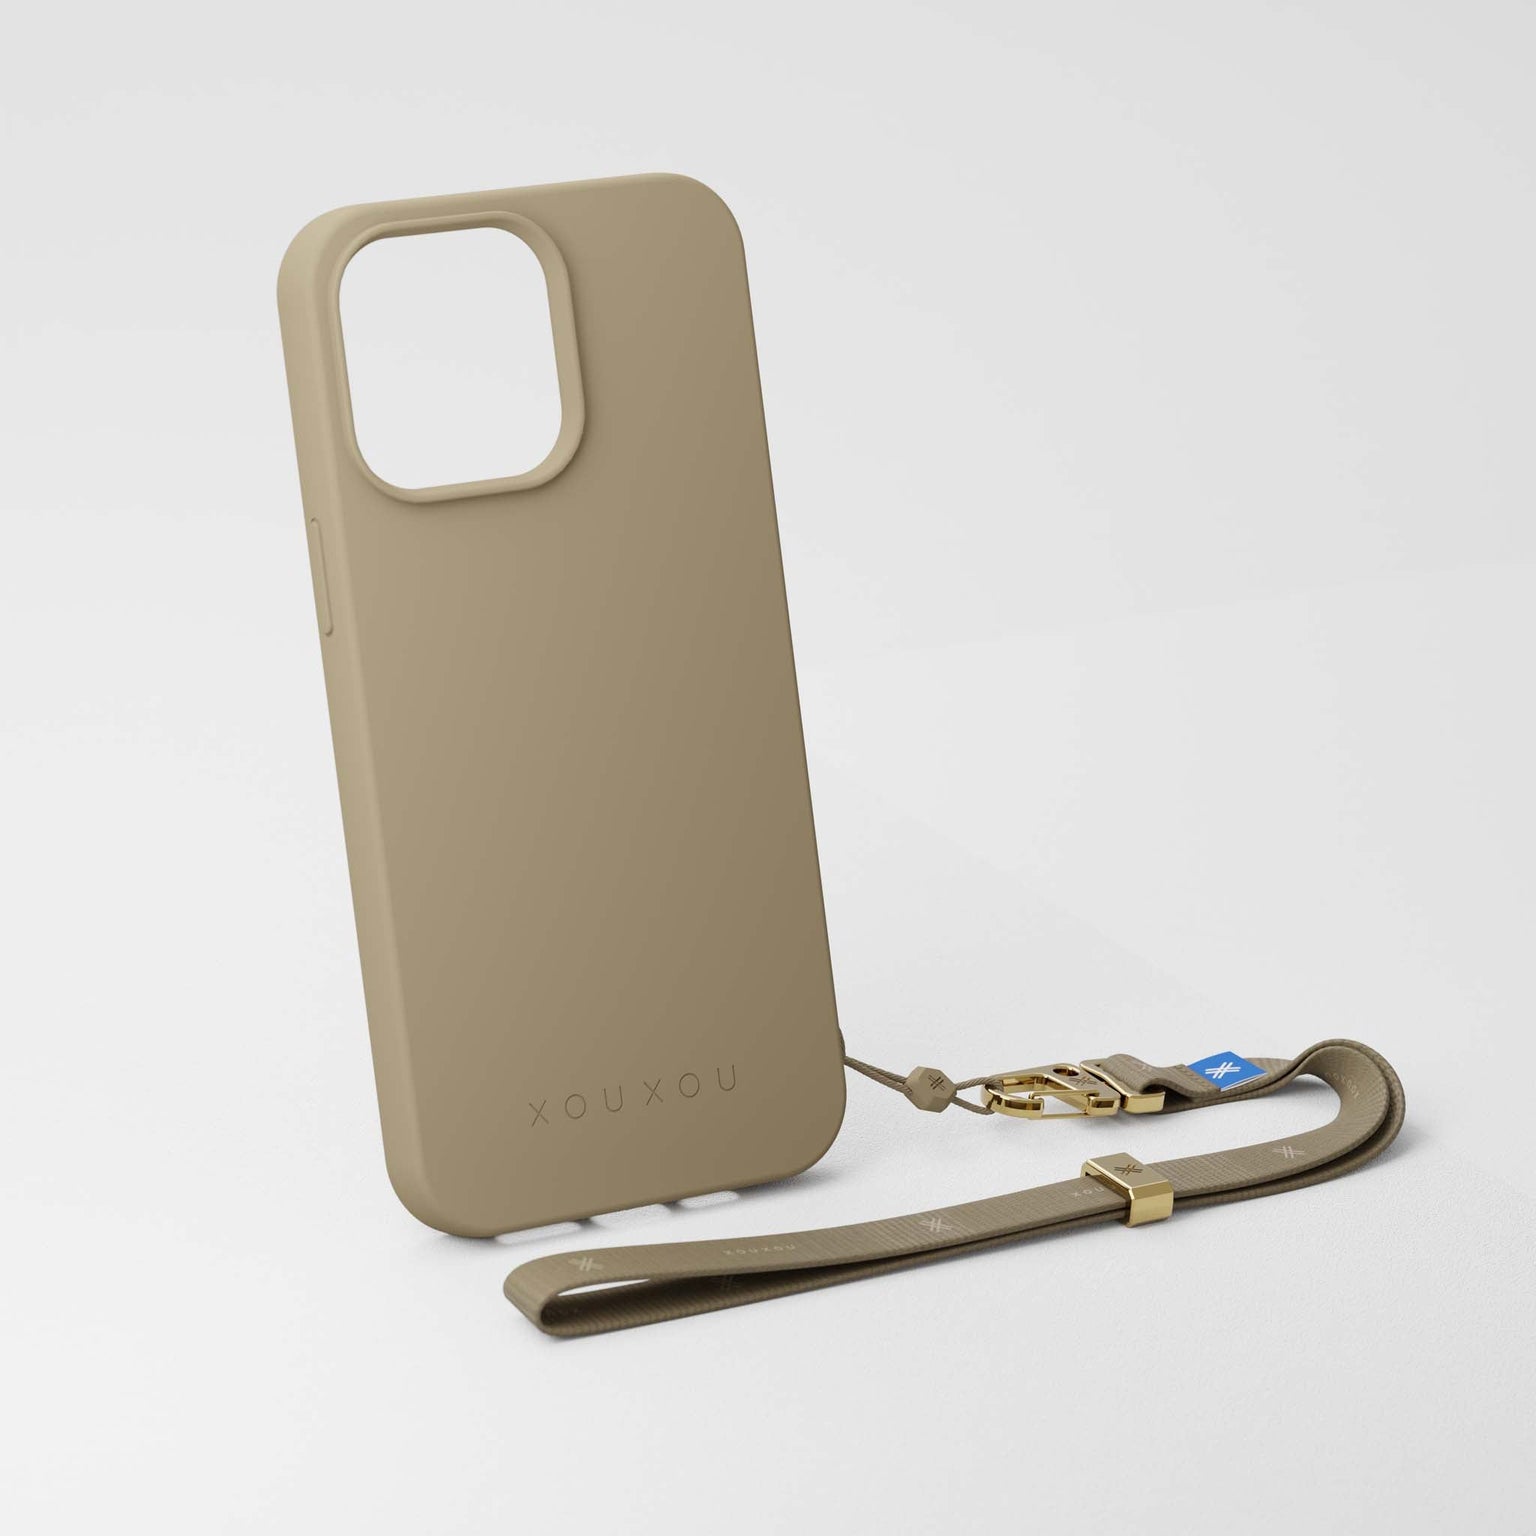 iPhone Case in Taupe Beige with Wrist Strap | XOUXOU